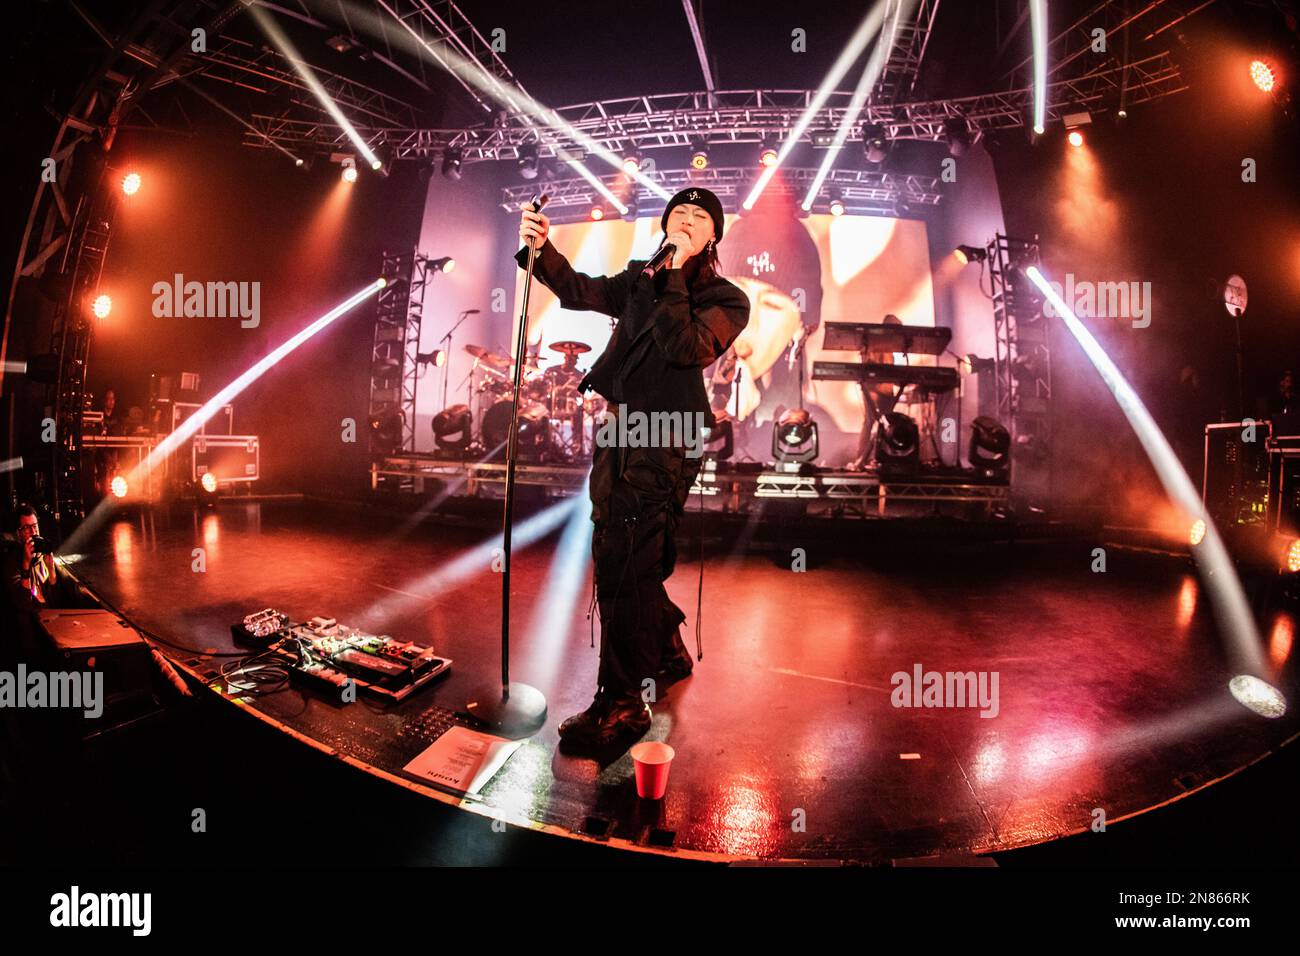 Milan Italy. 10 February 2023. The American singer-songwriter and producer Casey Luong known by his stage name KESHI performs live on stage at Fabrique during the 'Hell & Back Tour'. Stock Photo